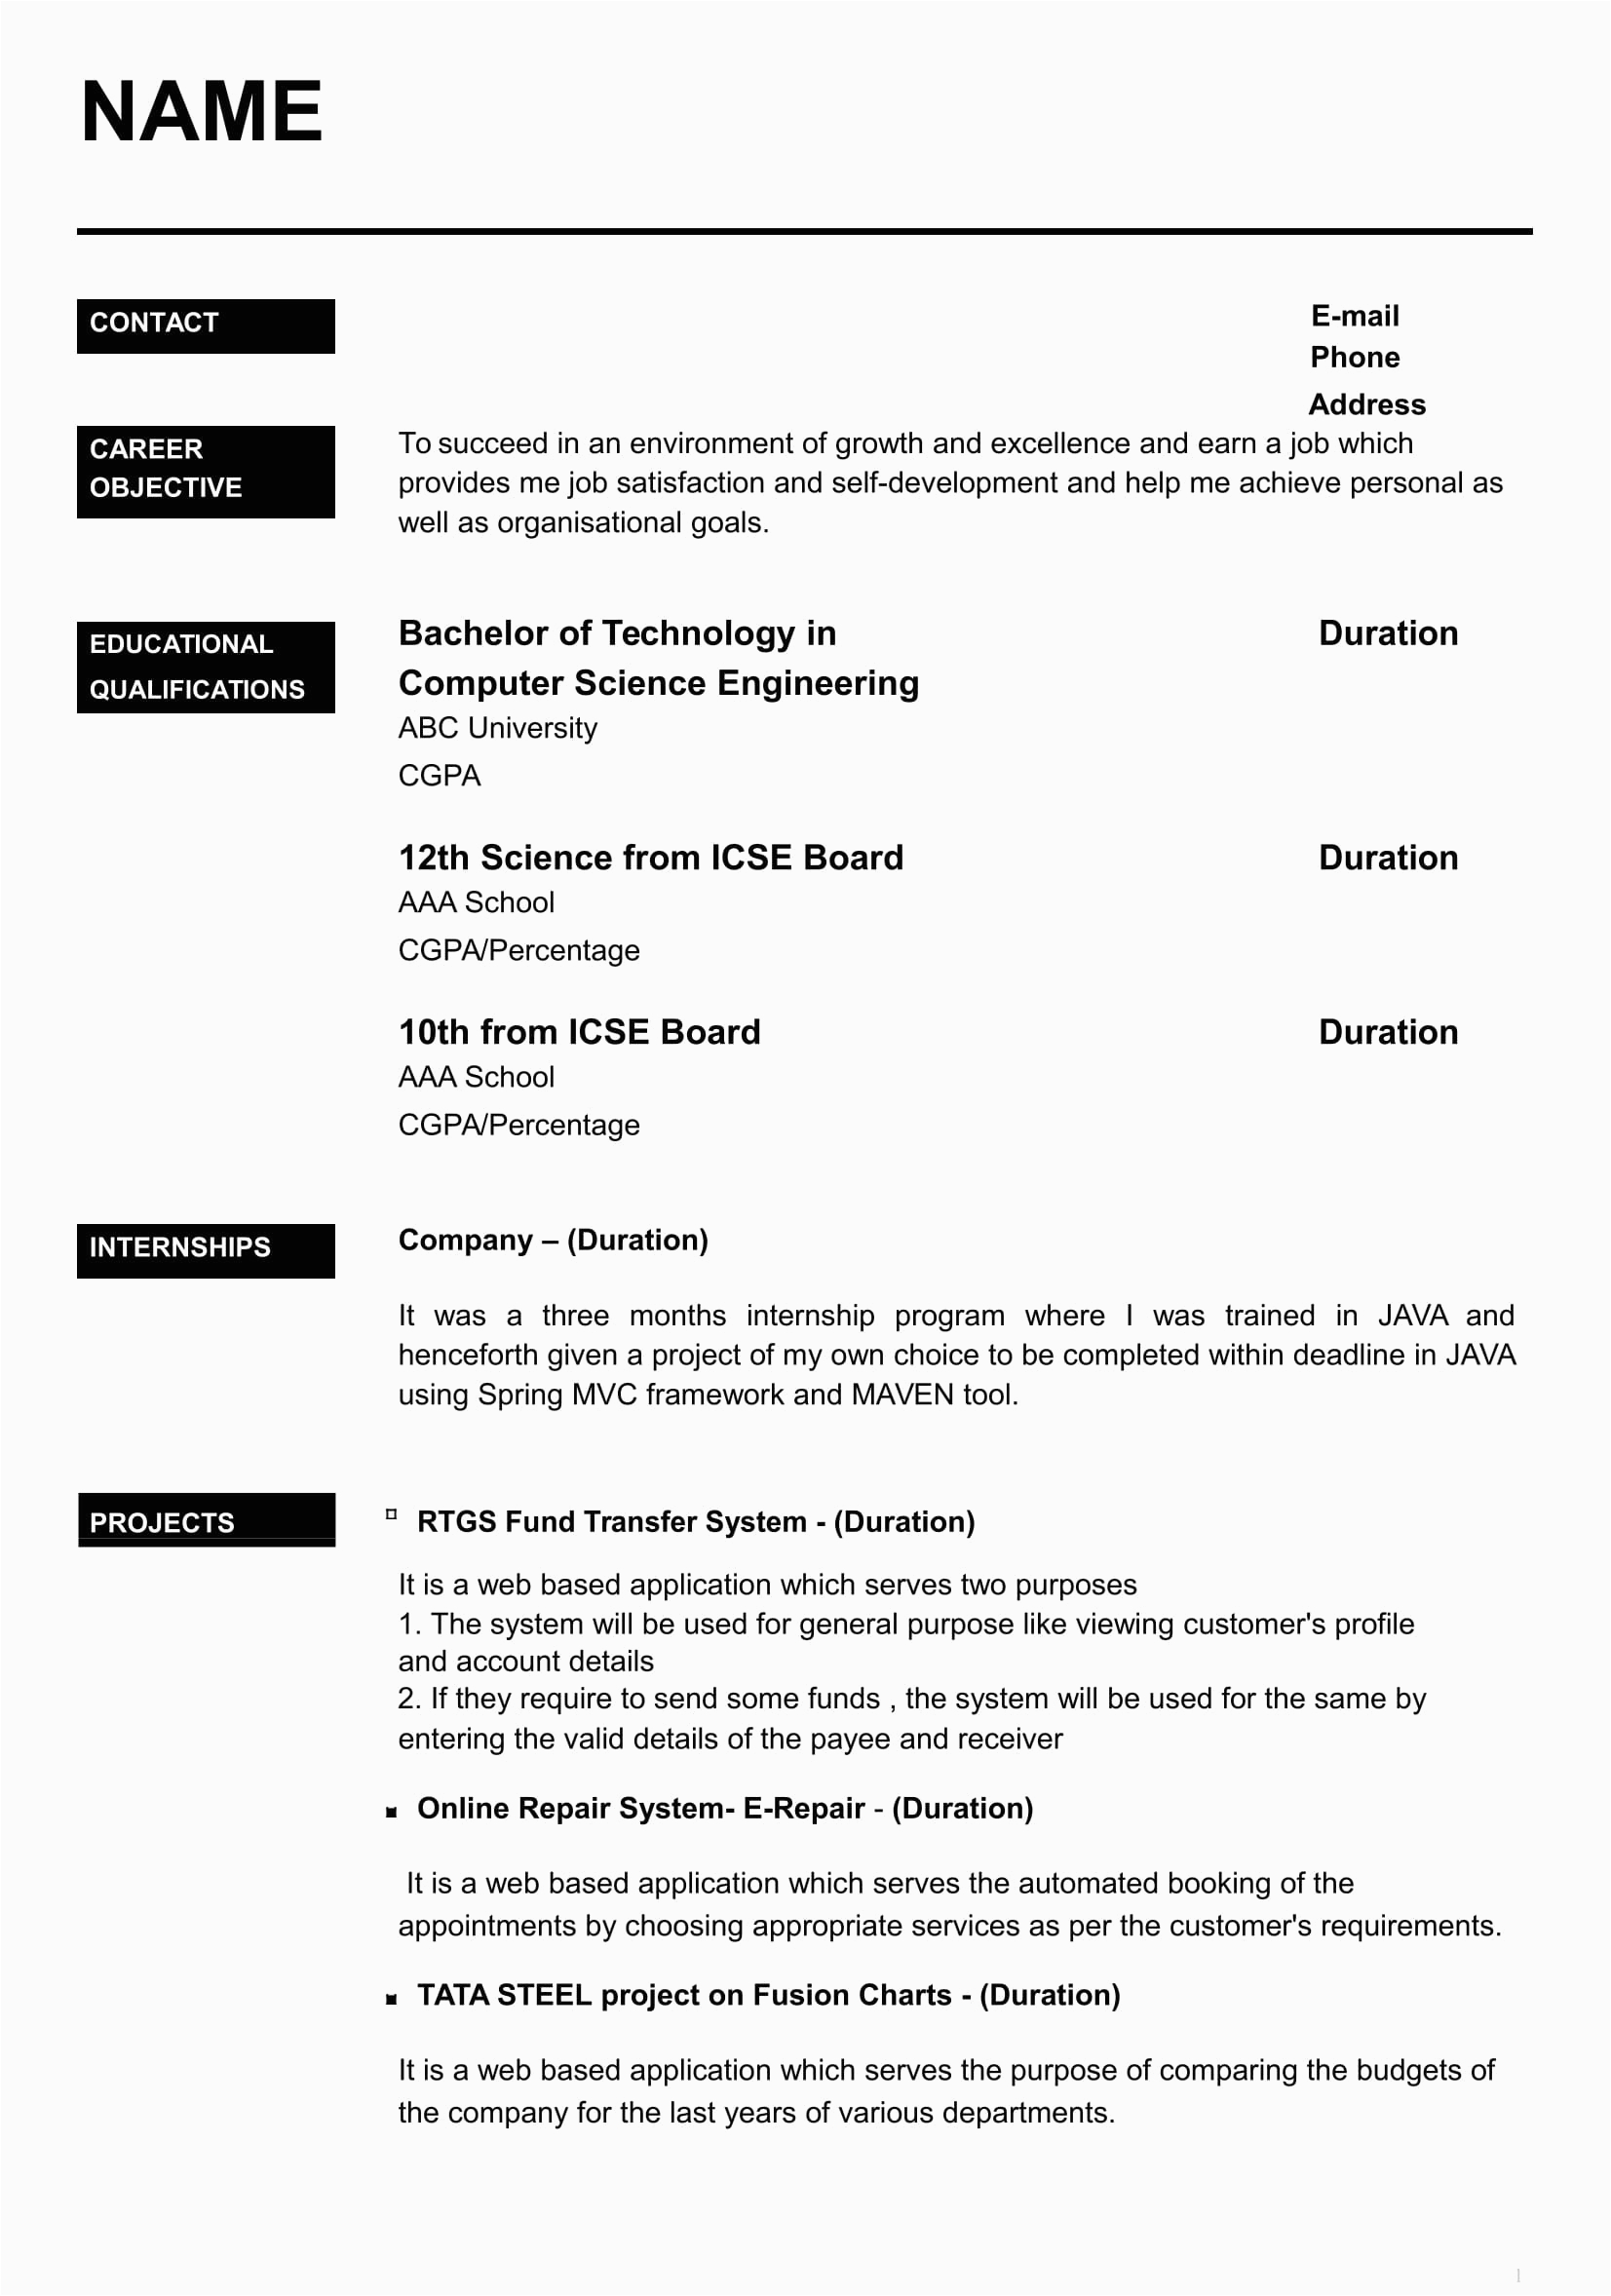 Sample Resume format for Freshers Free Download Resume formats for 2020